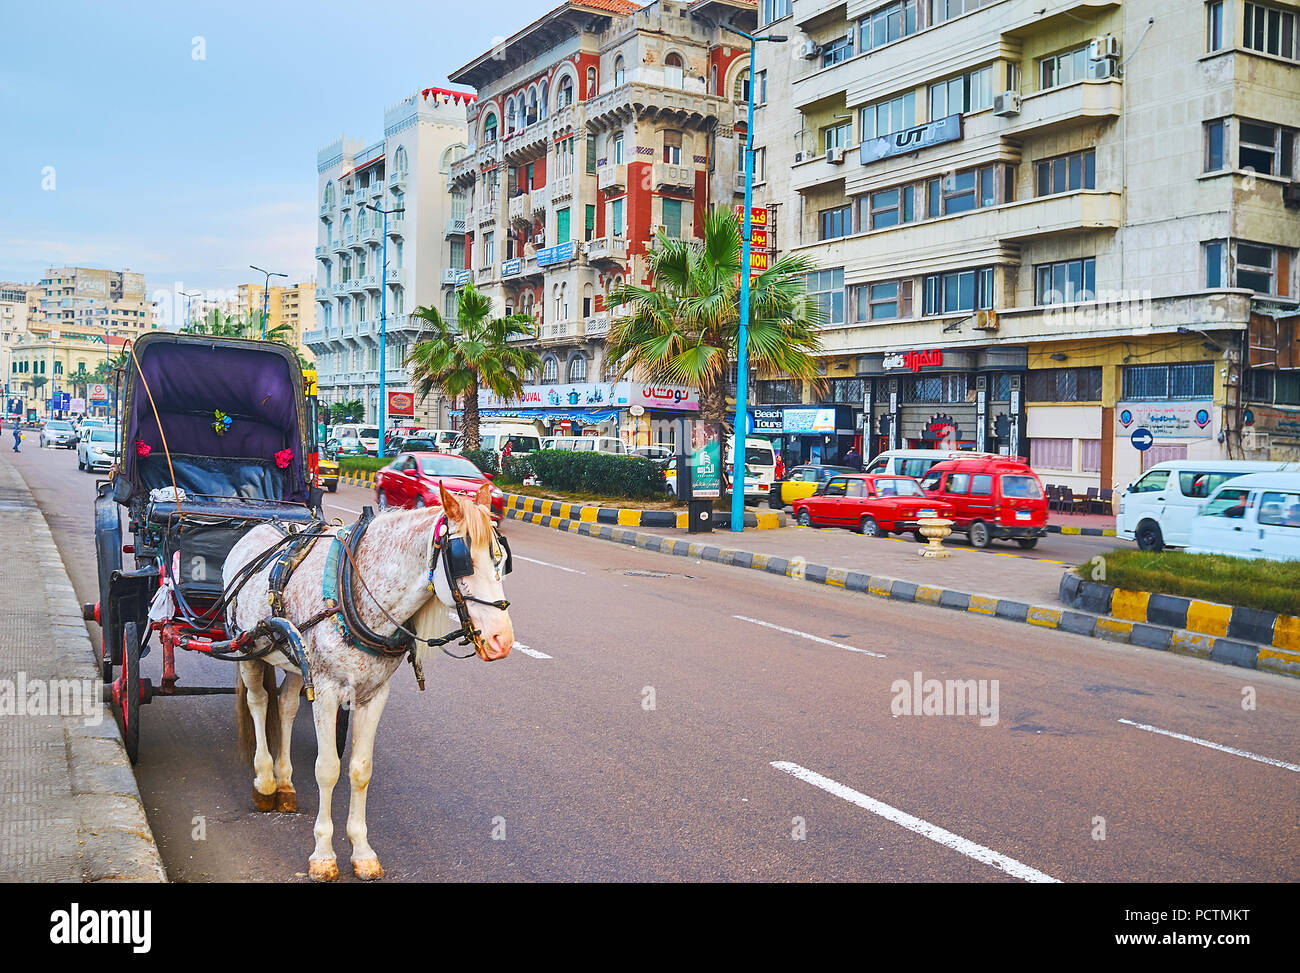 ALEXANDRIA, EGYPT - DECEMBER 18, 2017: The horse-drawn carriages are popular tourist attraction in city, the standard route stretches along the Cornic Stock Photo